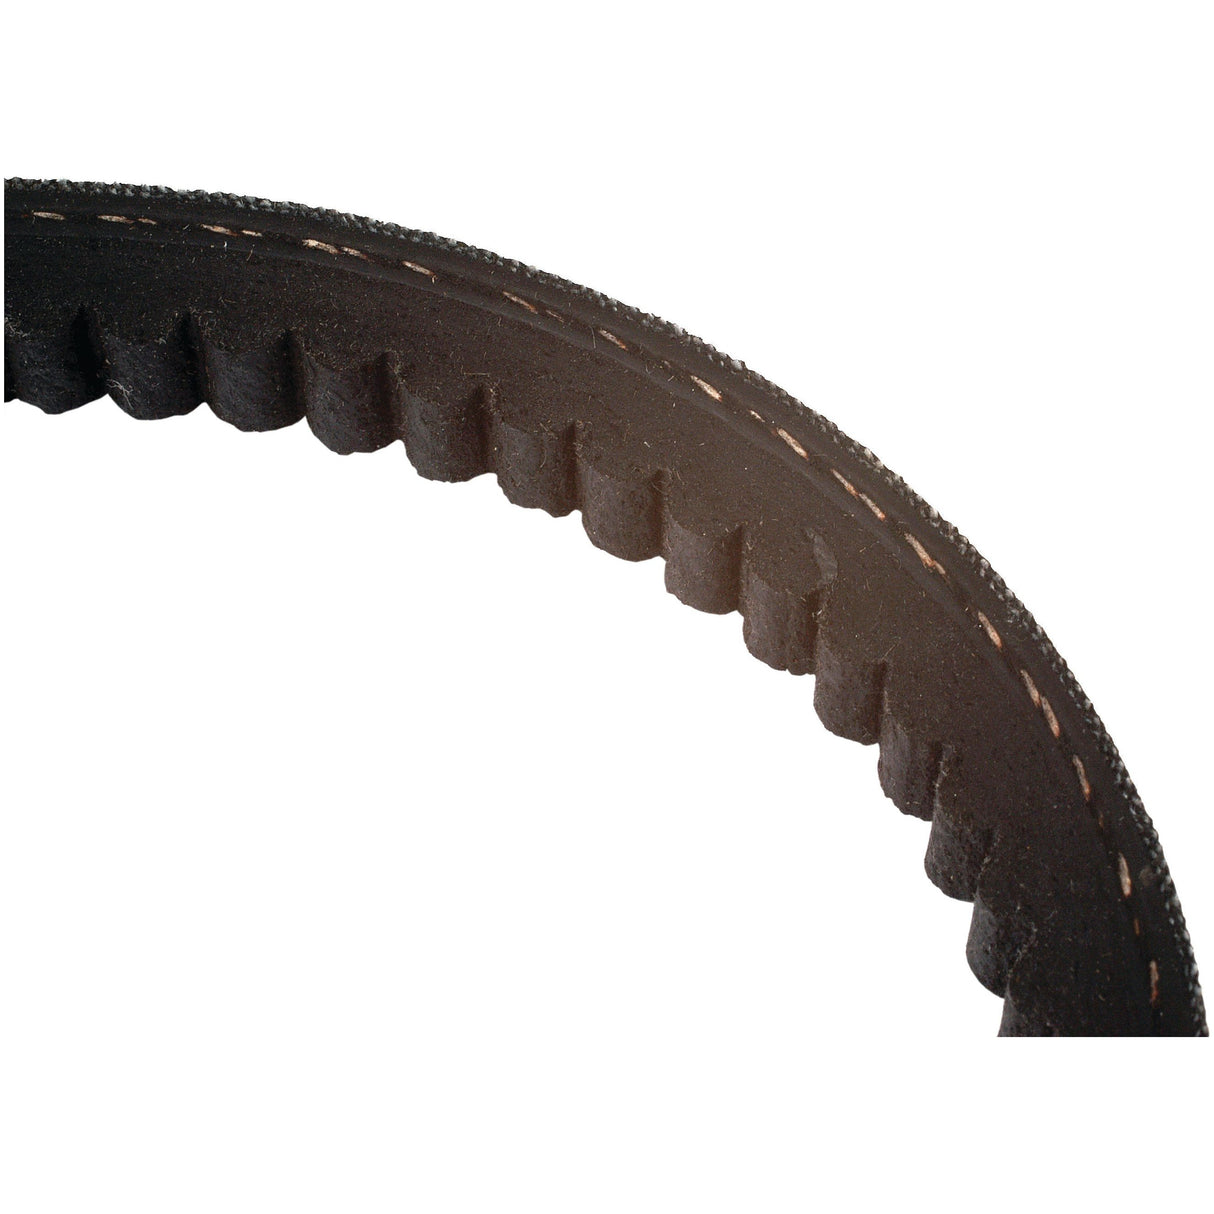 Raw Edge Moulded Cogged Belt - AVX Section - Belt No. AVX13x850
 - S.18679 - Farming Parts